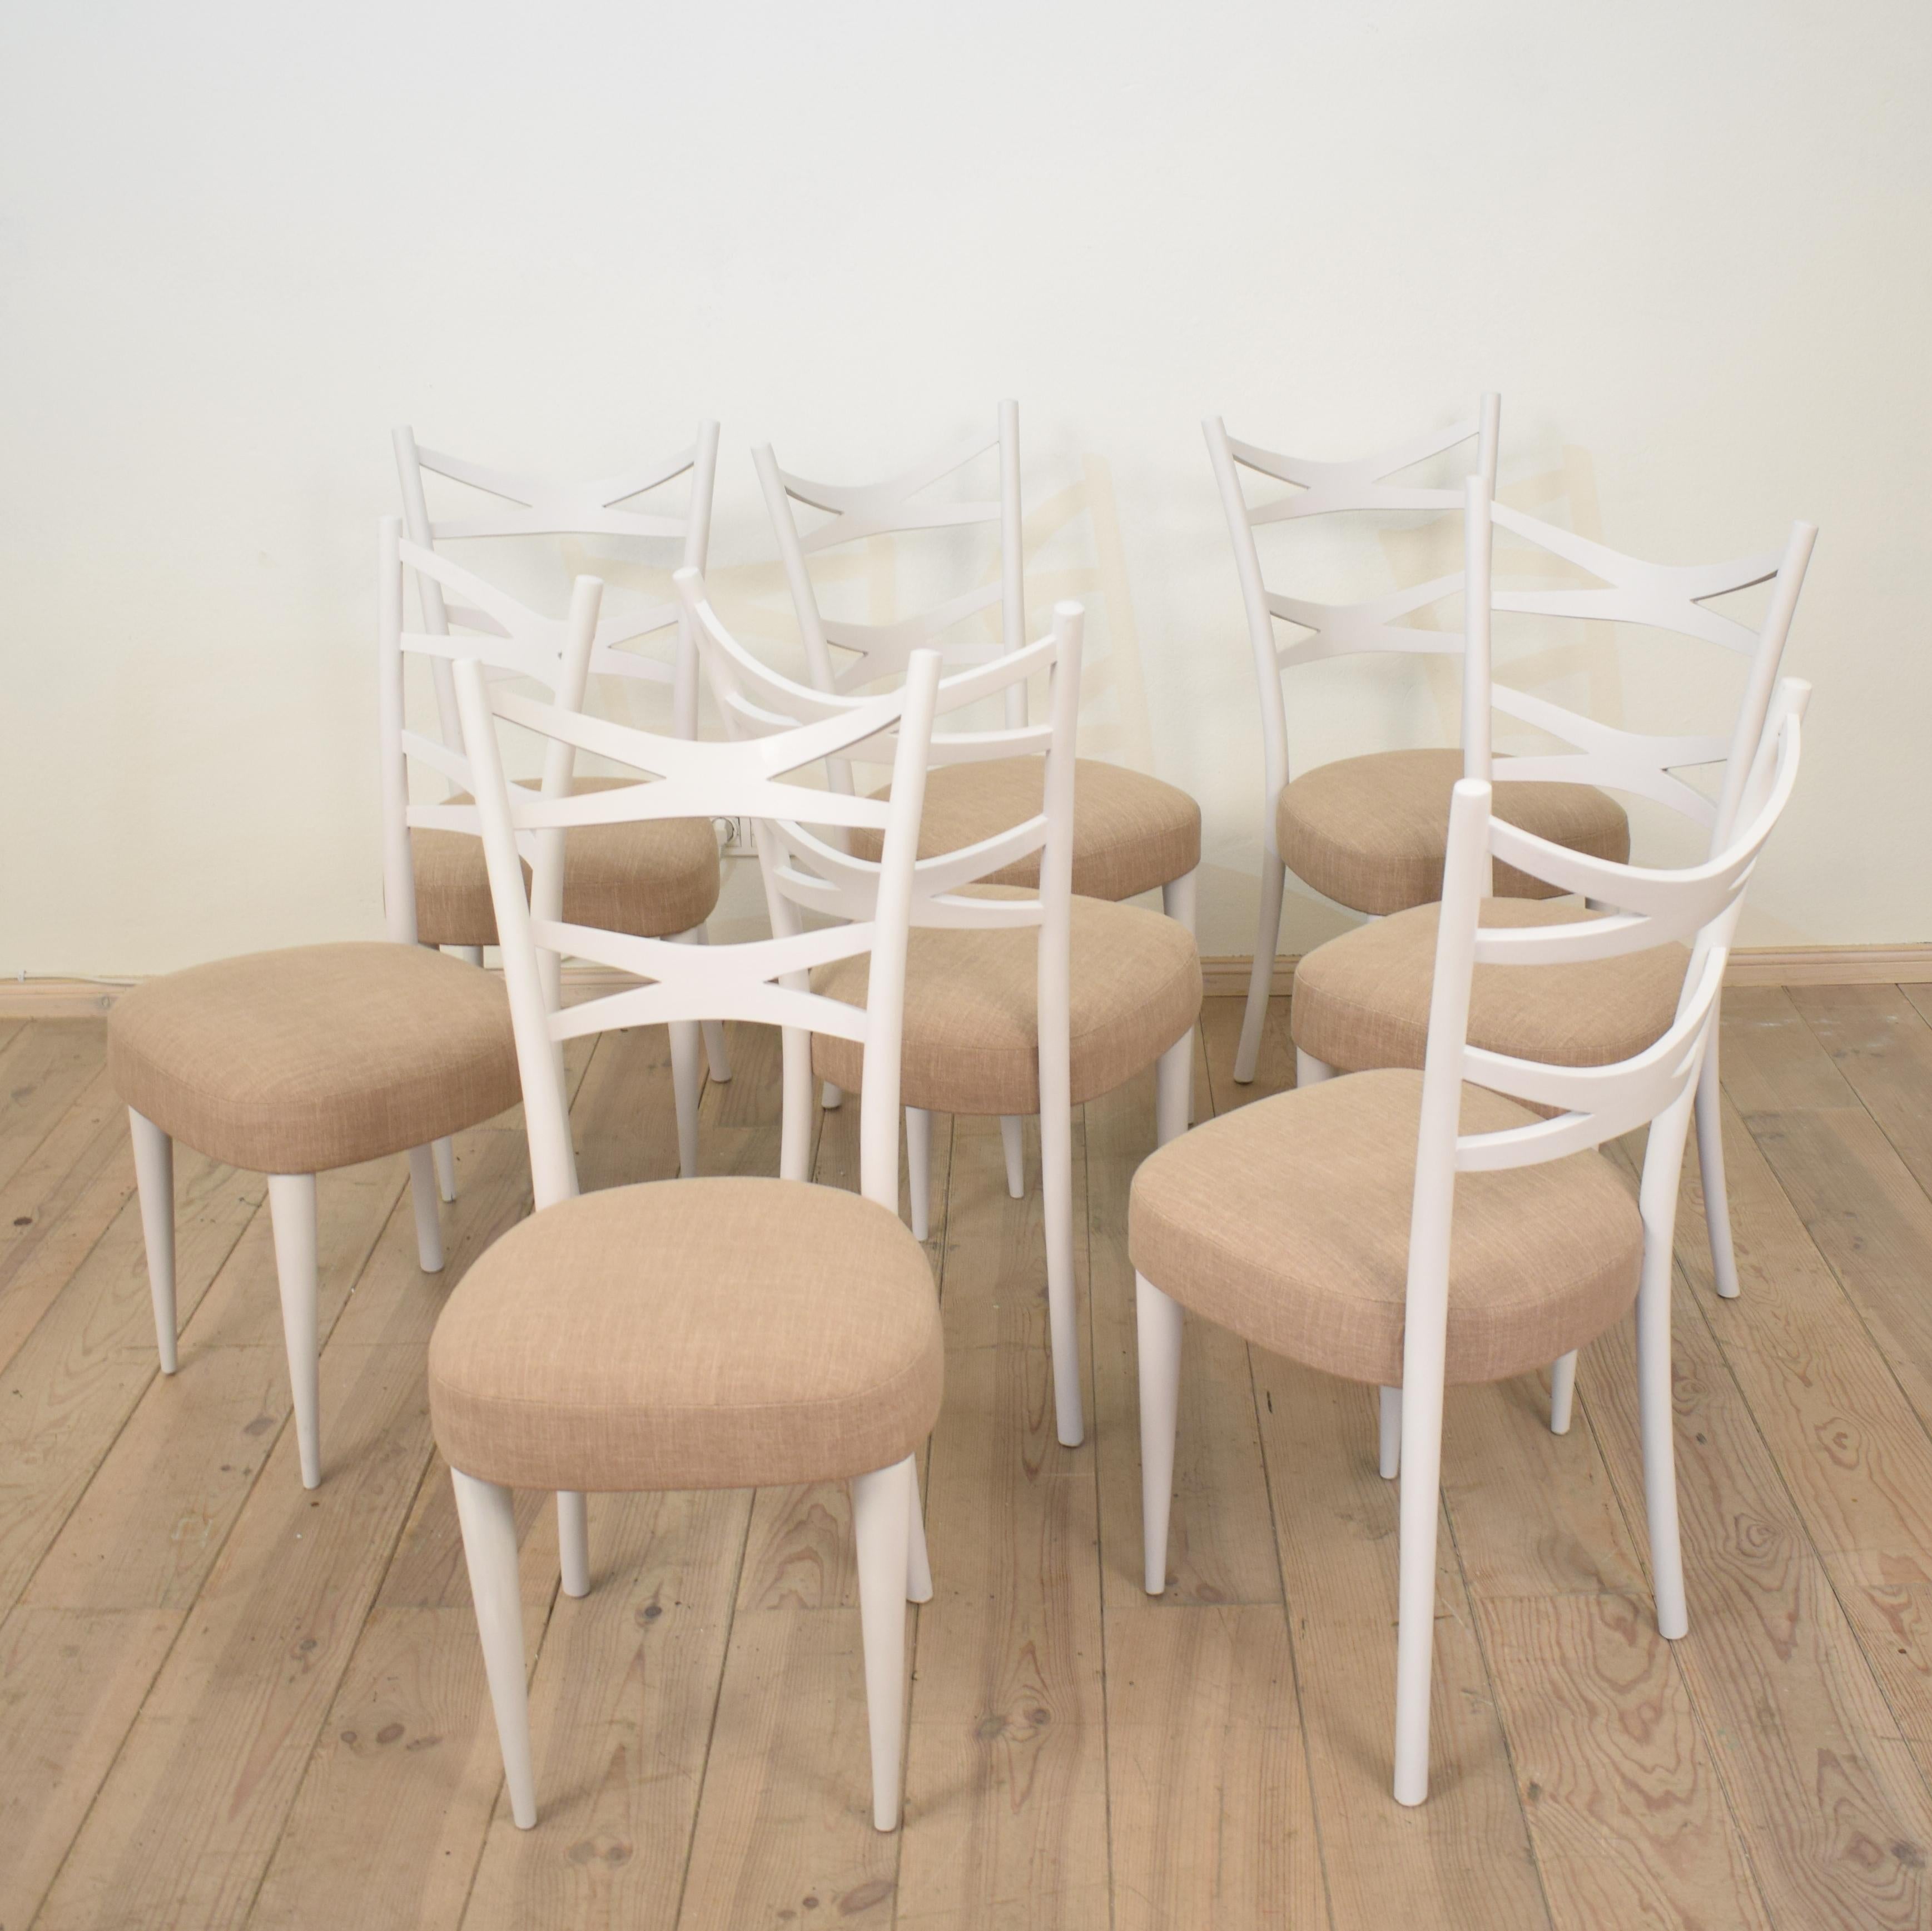 This elegant Set of Eight Dining Chairs where made in the Manor of Osvaldo Borsani in the 1940s in Italy.
They got repainted in a grey white color and re-upholstered in a beige linen cover.
The chair is very comfortable to sit because of its bowed